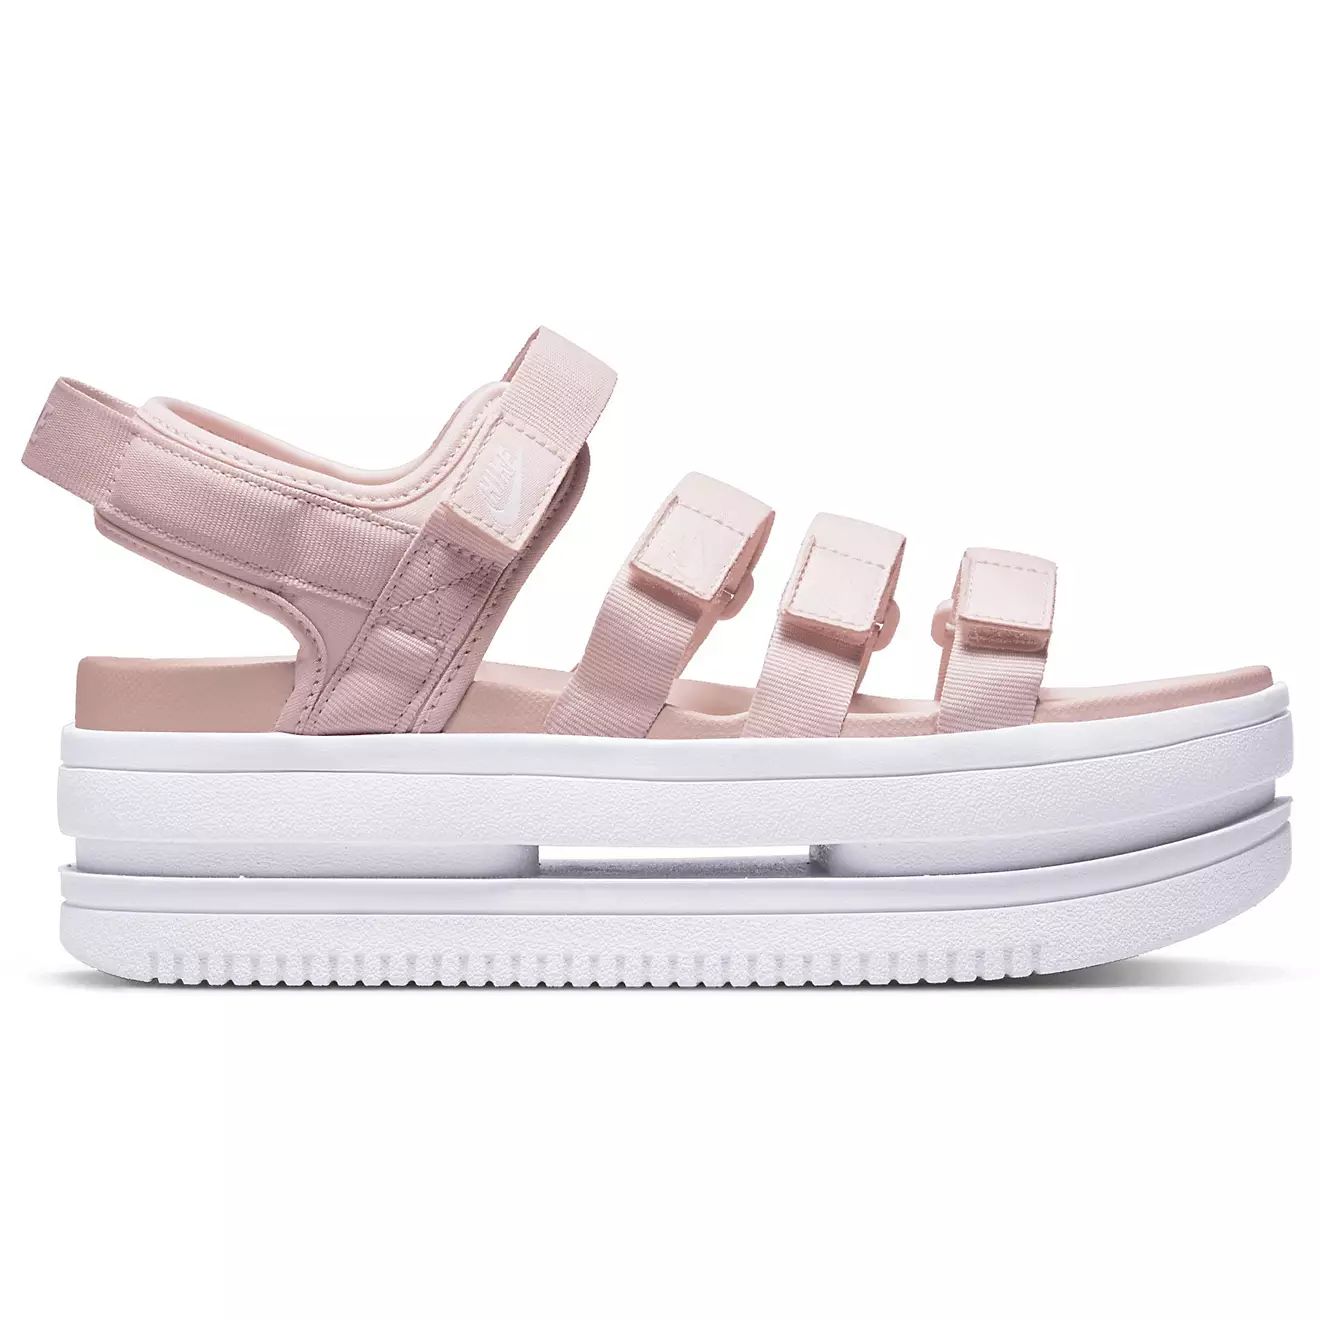 Nike Women's Icon Classic Platform Sandals | Academy Sports + Outdoors